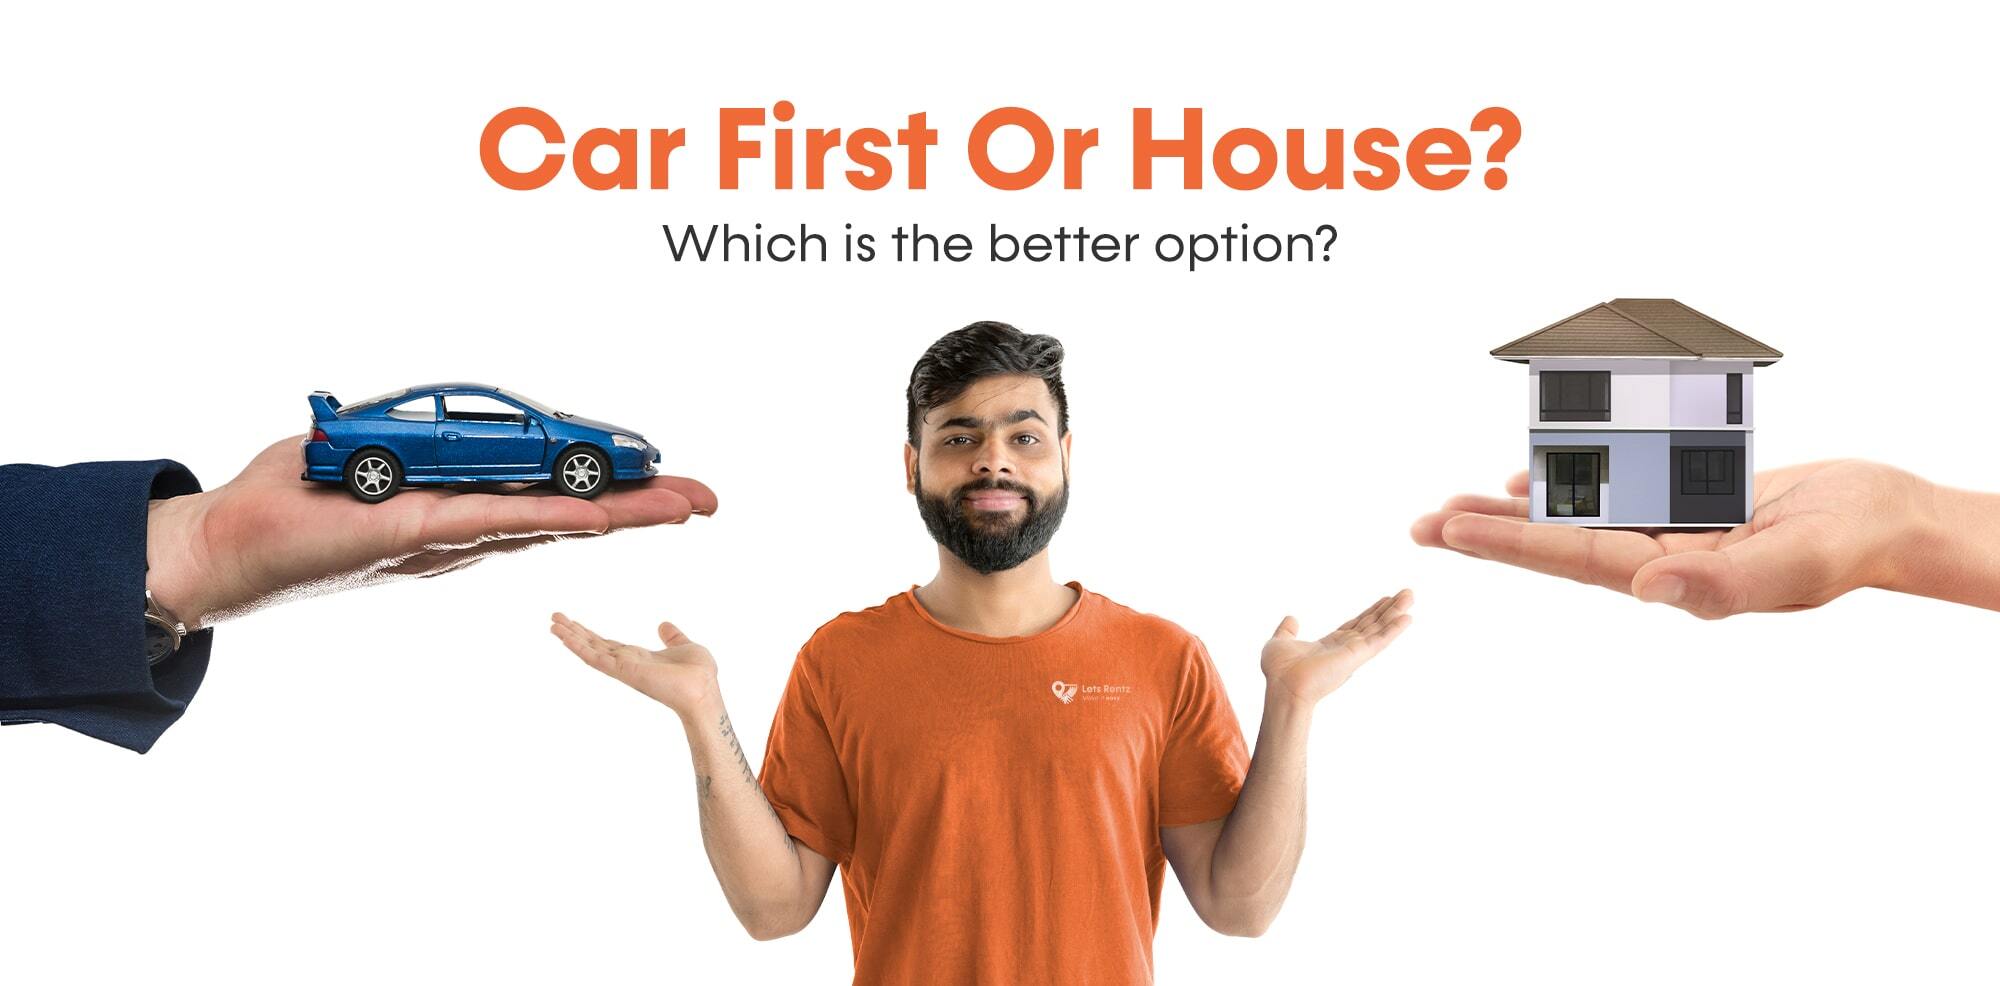 Car First or House: Which is the Better Option?